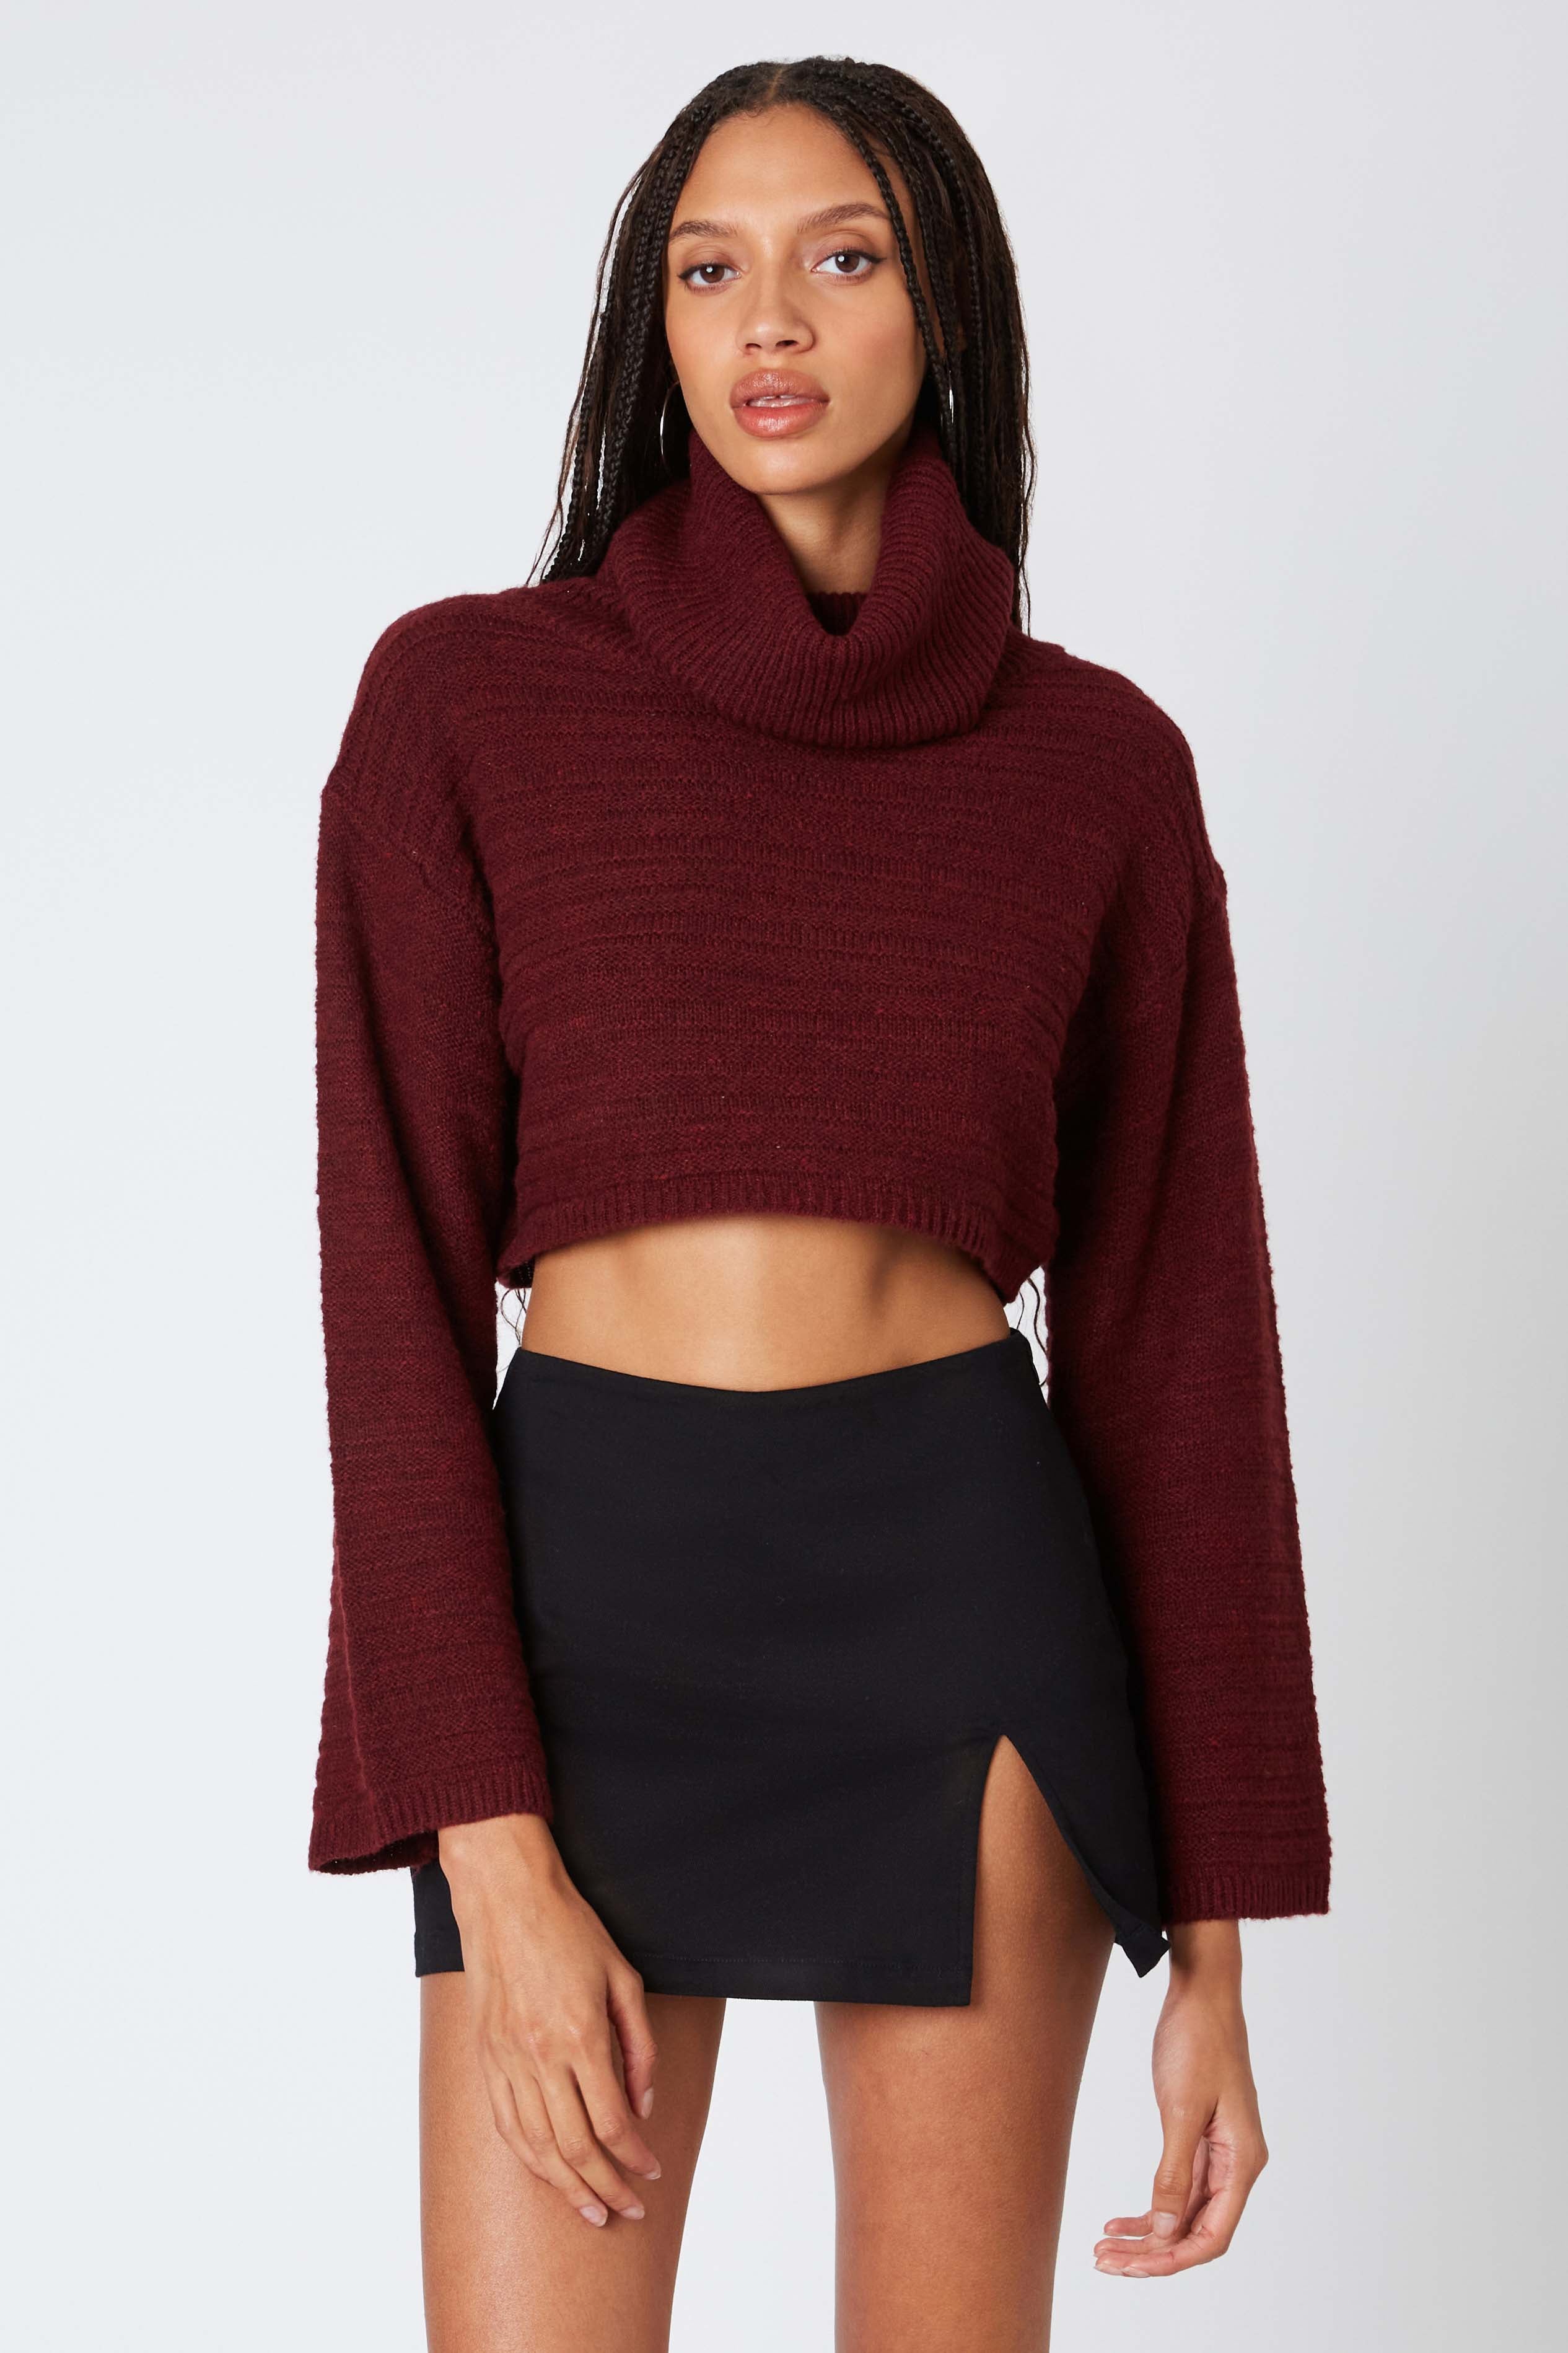 Cropped Turtleneck Sweater in Wine Front View